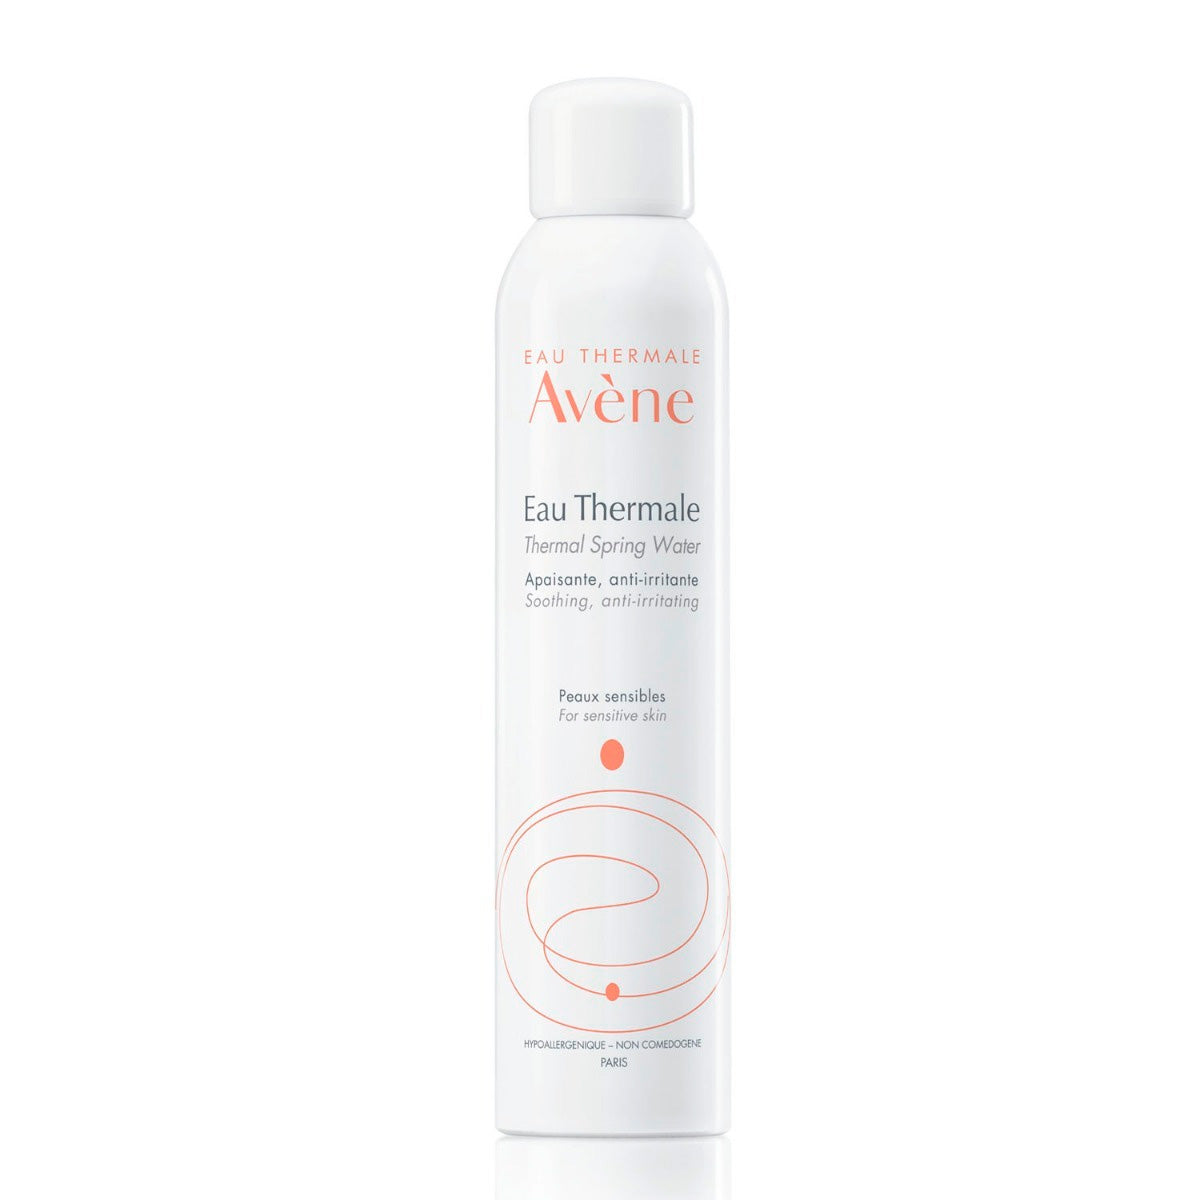 Avène Eau Thermale Thermal Spring Water 300 ml